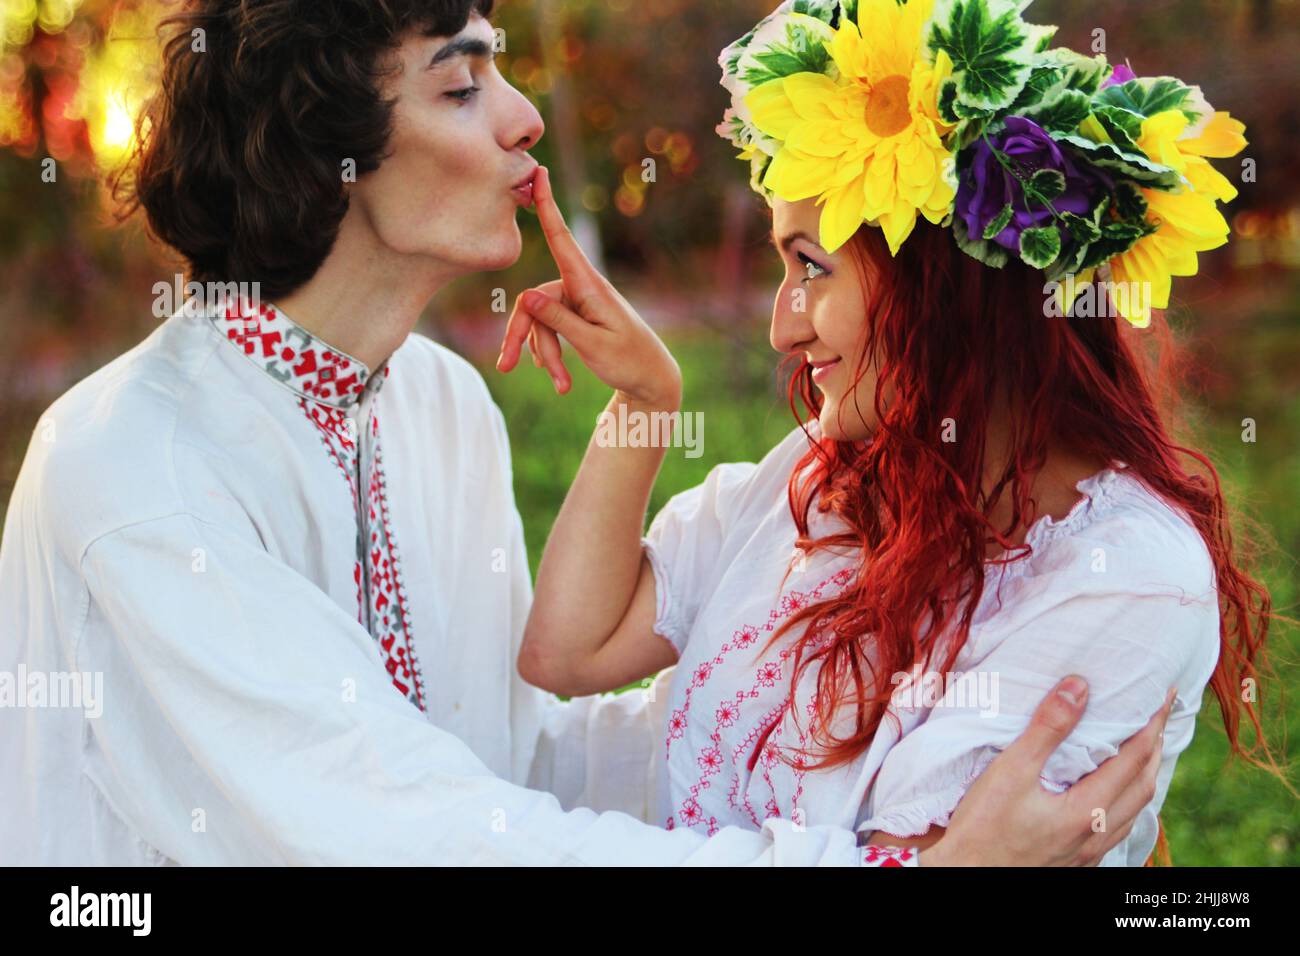 couple in love in national costumes, europe, traditional costumes for a wedding in eastern europe, a wreath on a girl's head, wedding Stock Photo